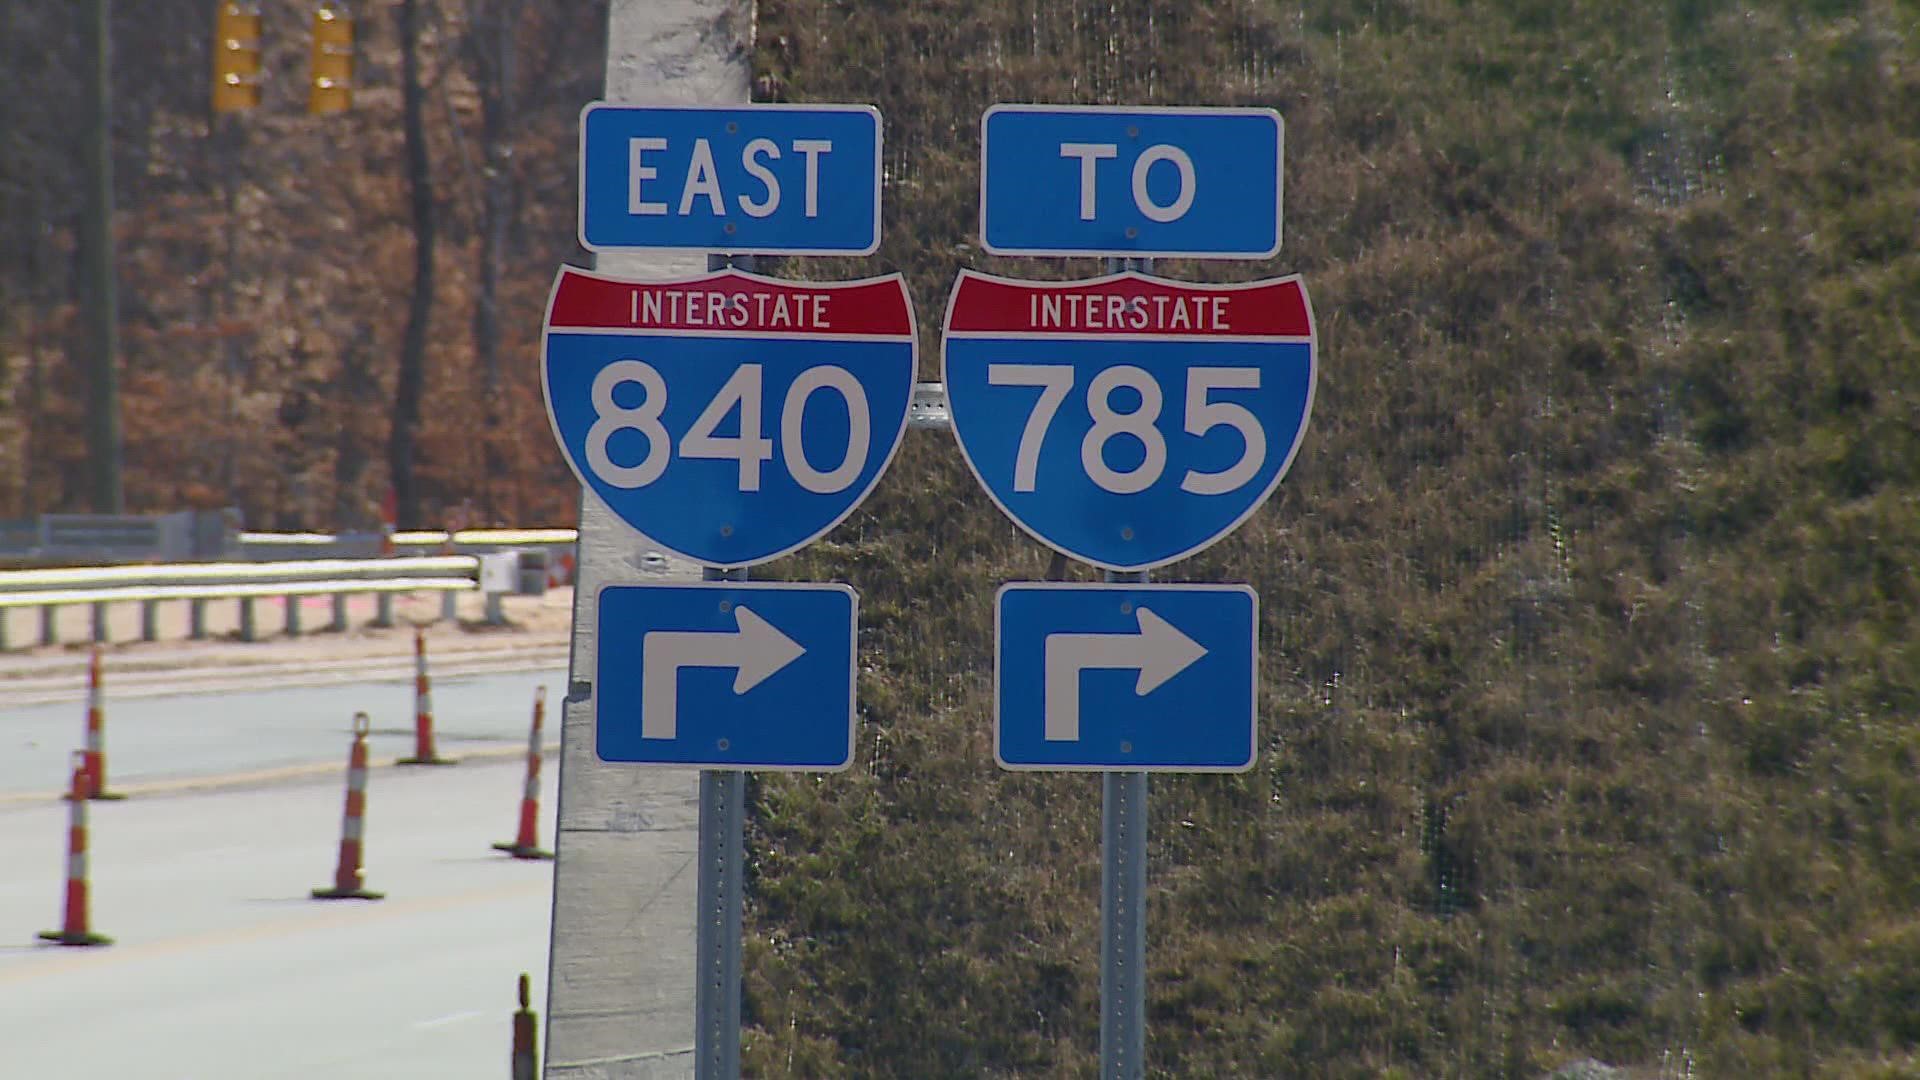 We asked NCDOT about the confusing traffic pattern at the N. Elm Street junction, lack of signage on North US-29, and lack of lighting on the new stretch.